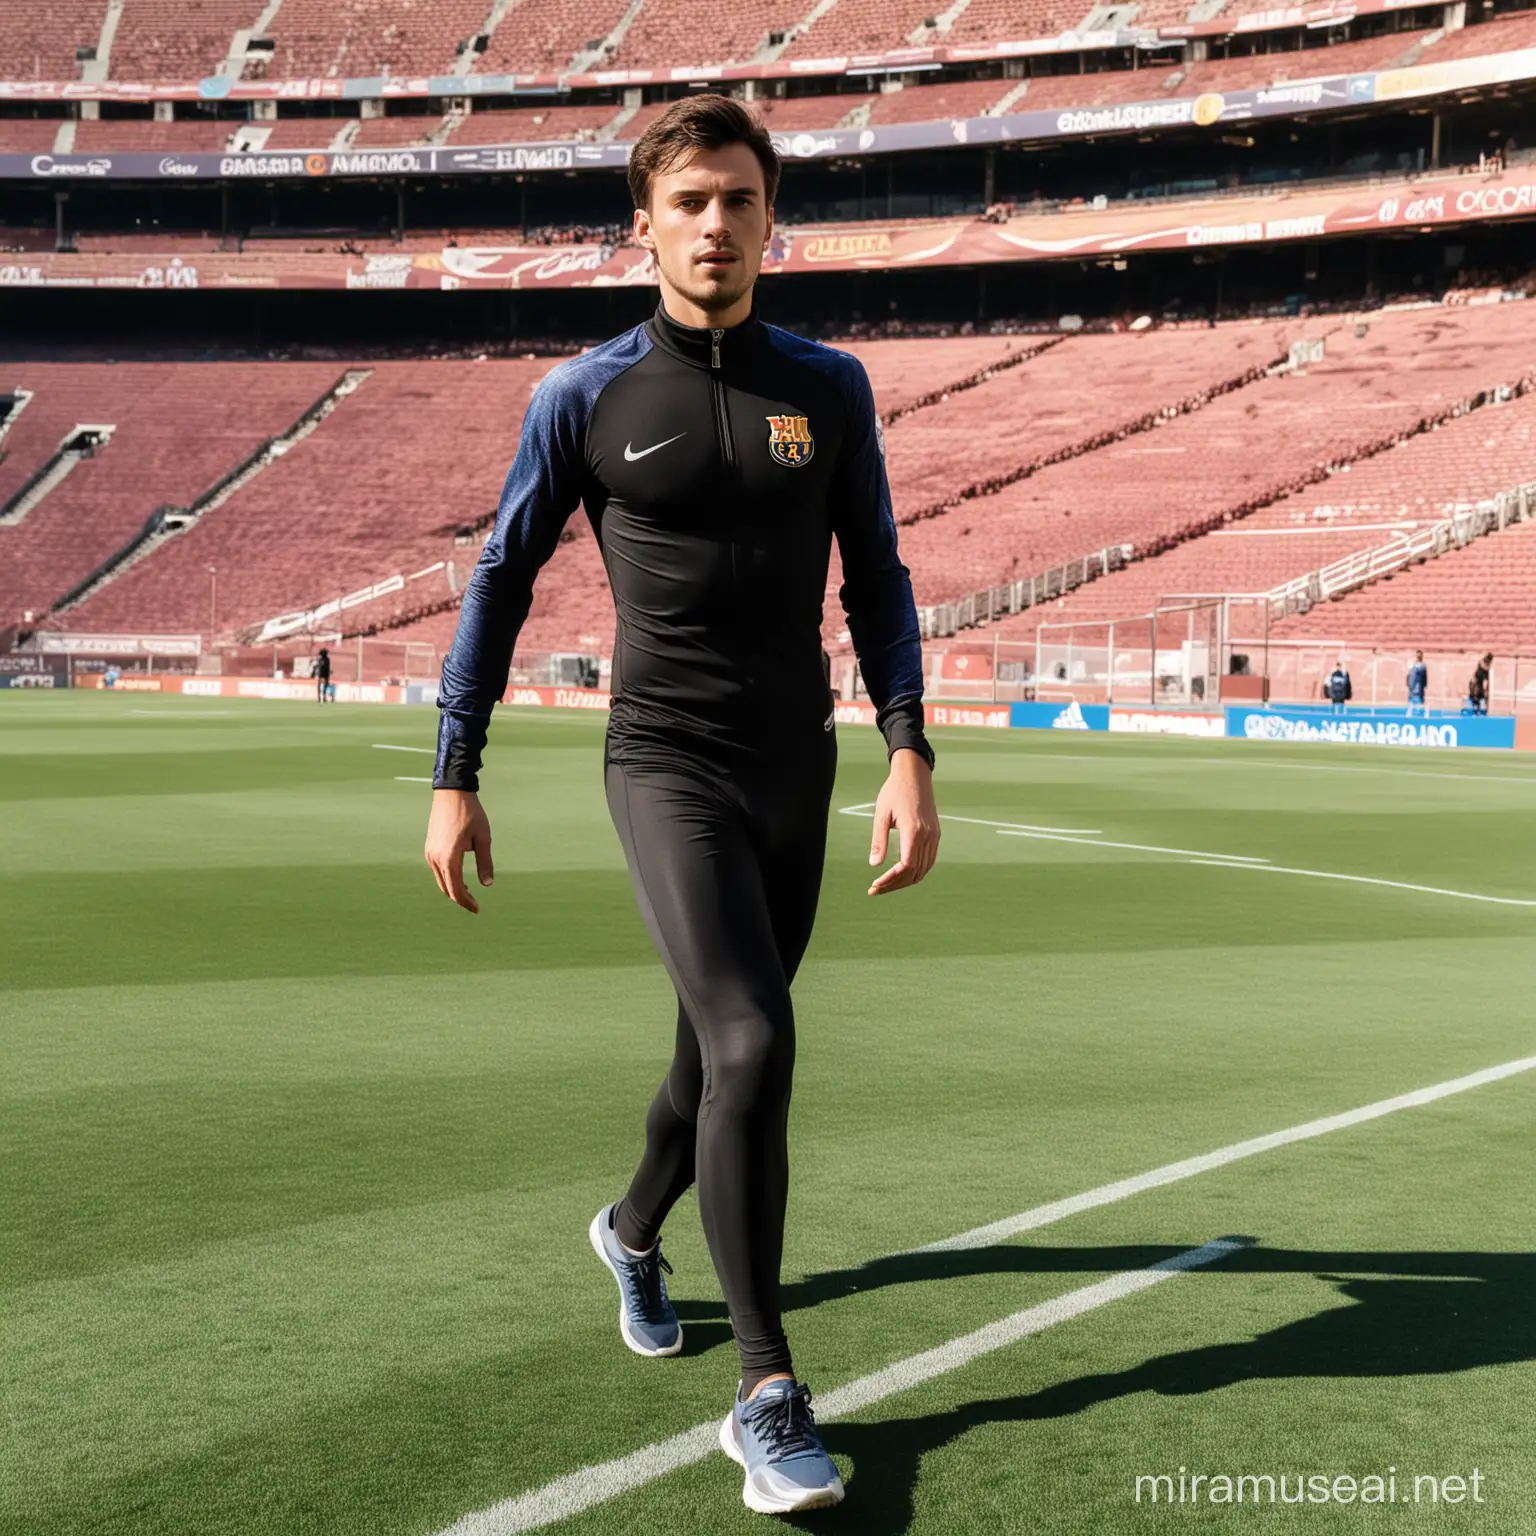 Athletic Young Man Jogging in SkinTight Chelsea Football Catsuit in Barcelonas Camp Nou on a Hot Summer Day